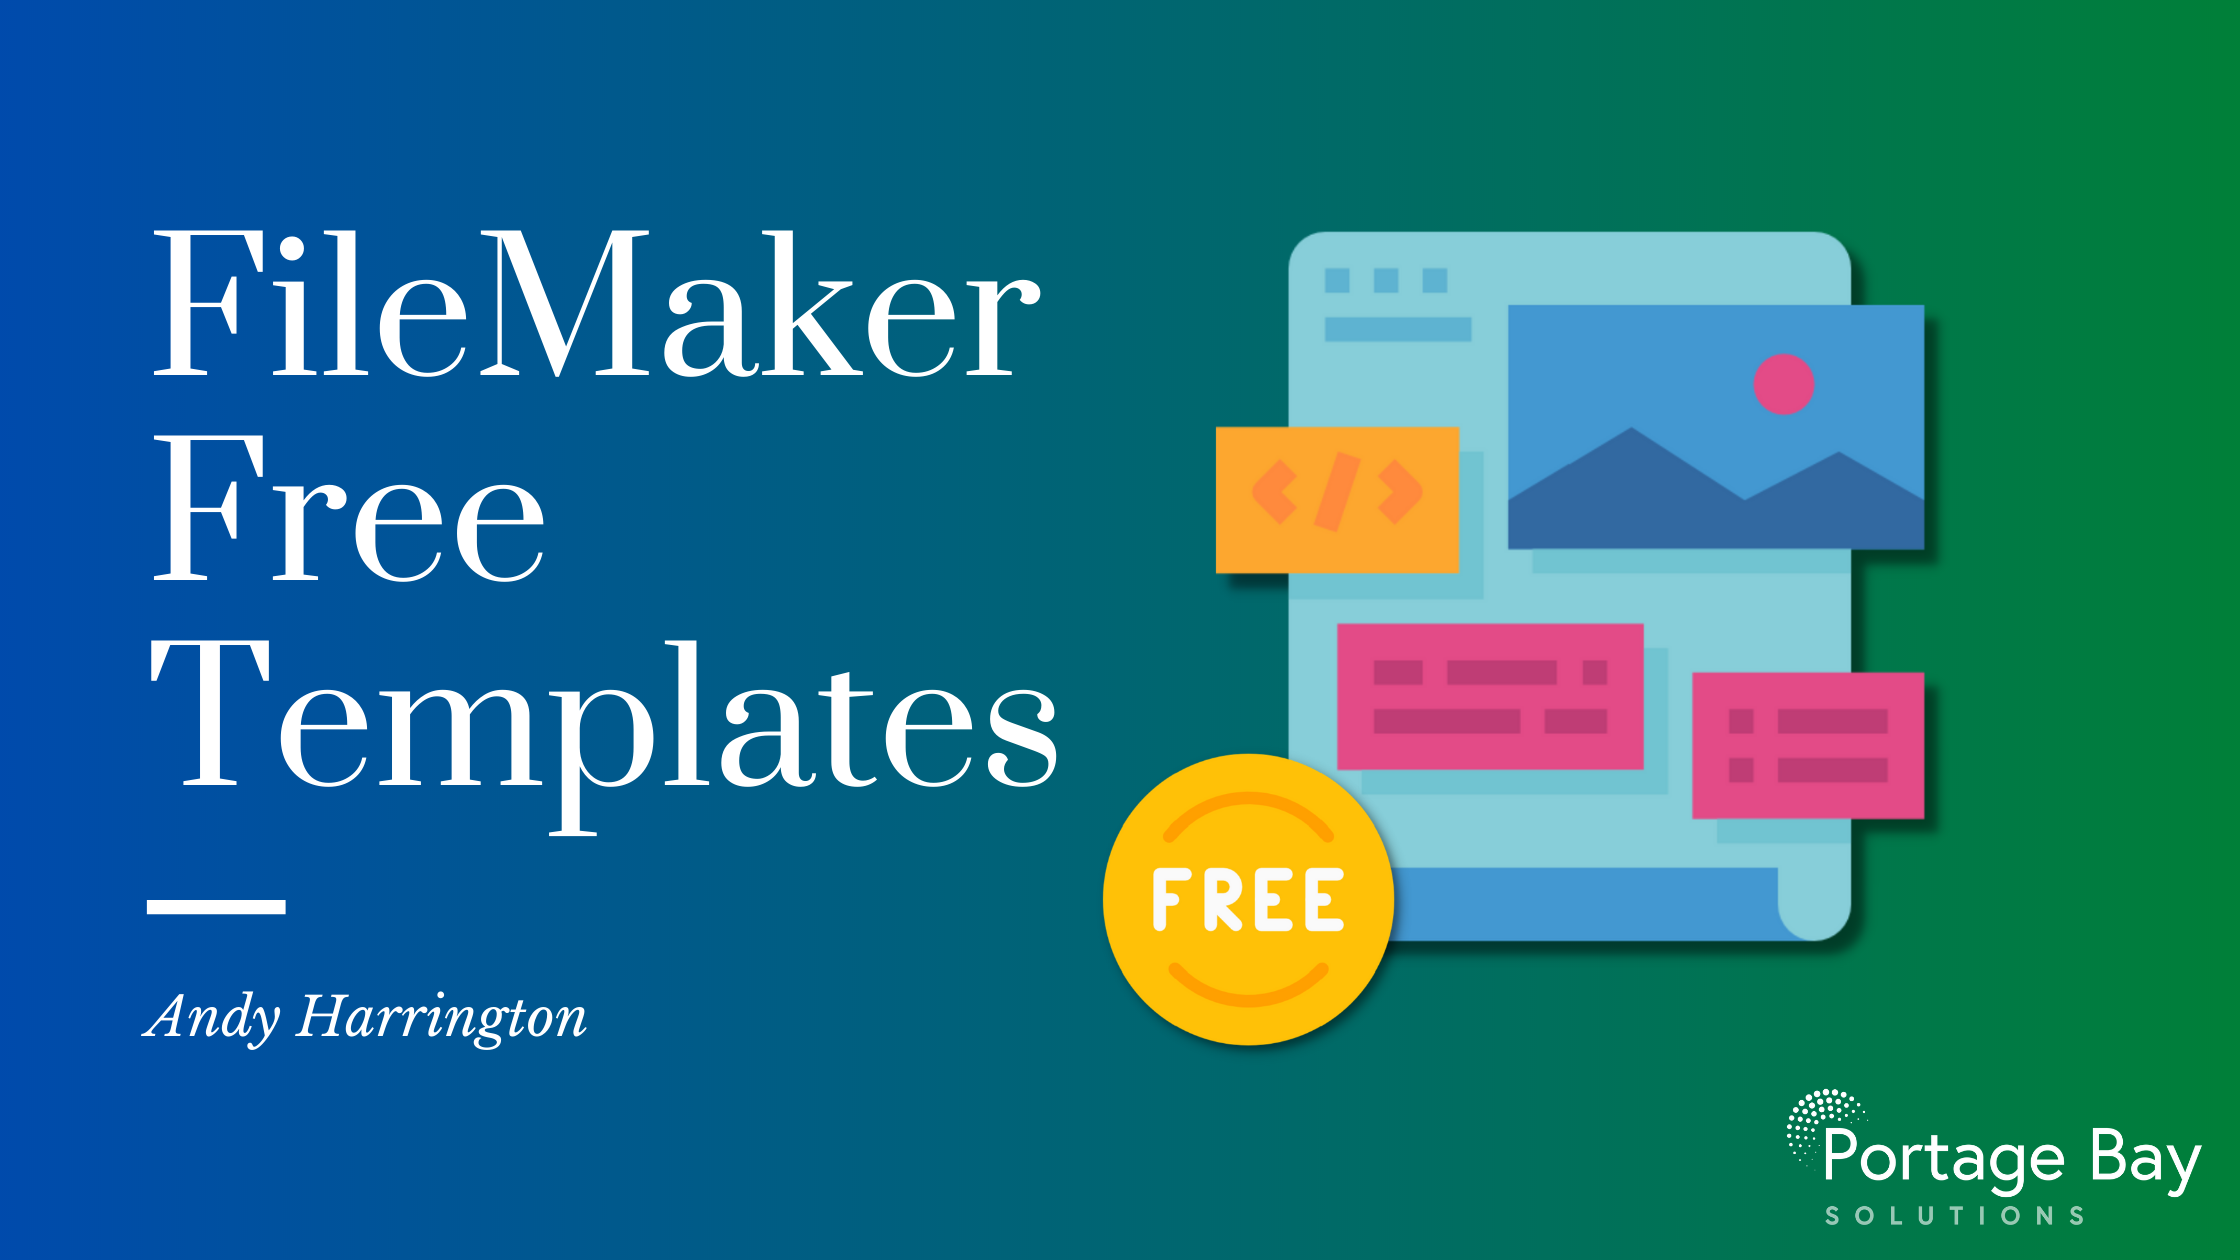 FileMaker Free Templates  Portage Bay Solutions  FileMaker Within Filemaker Business Templates